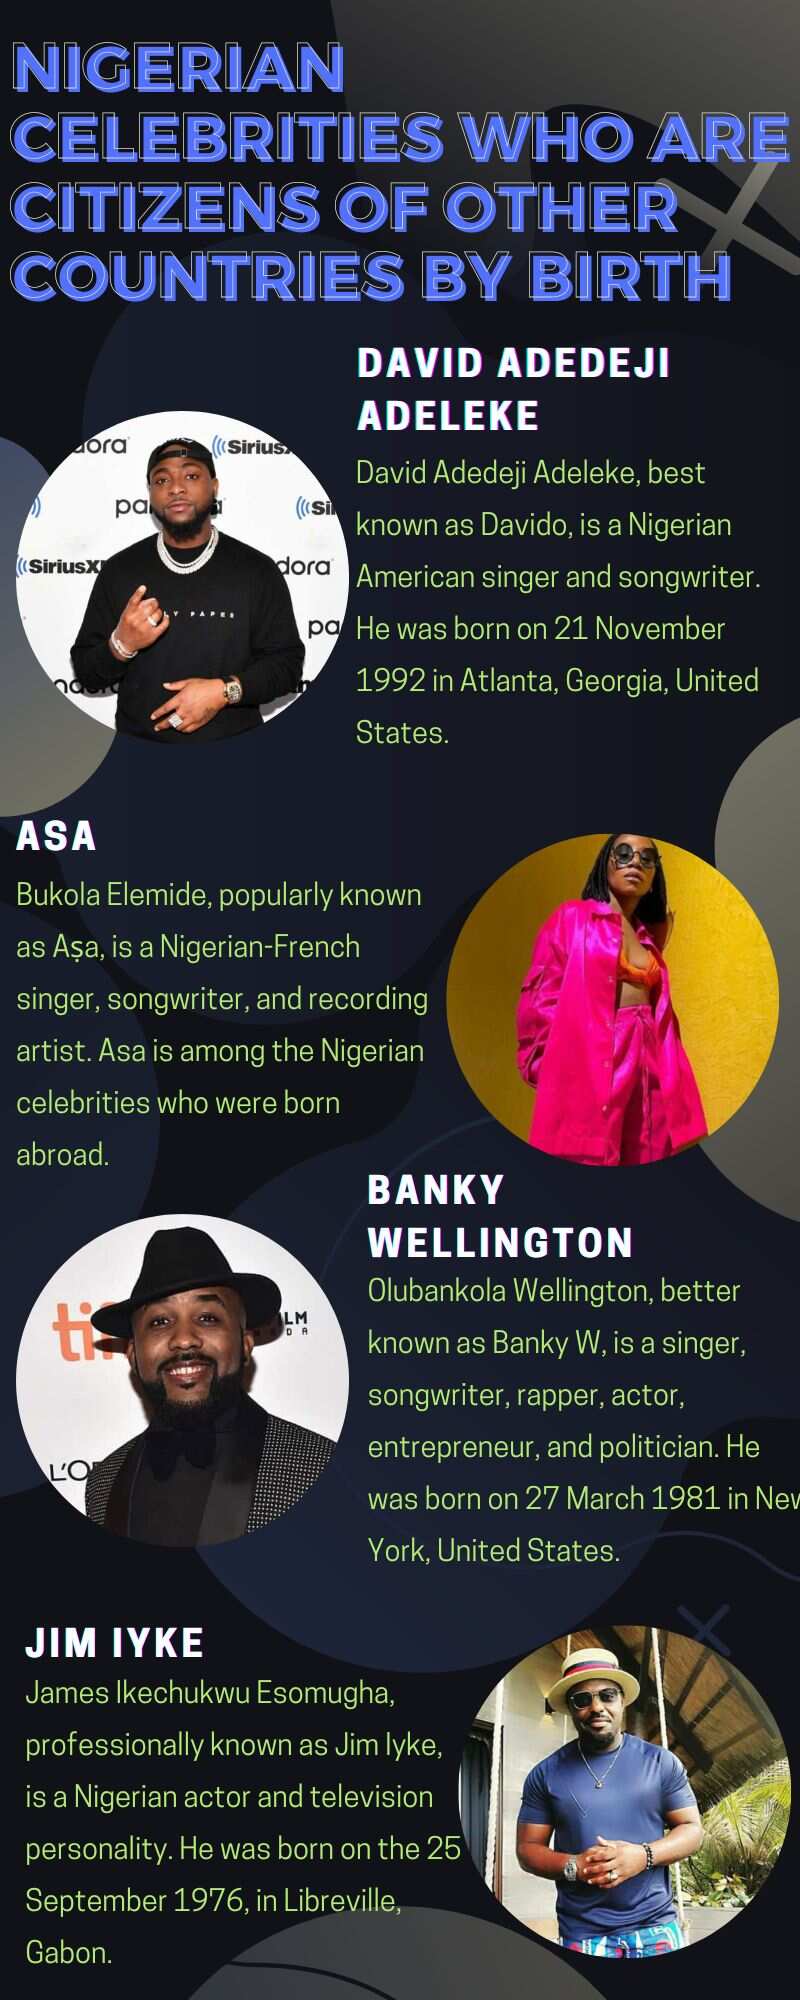 Nigerian celebrities who are citizens of other countries